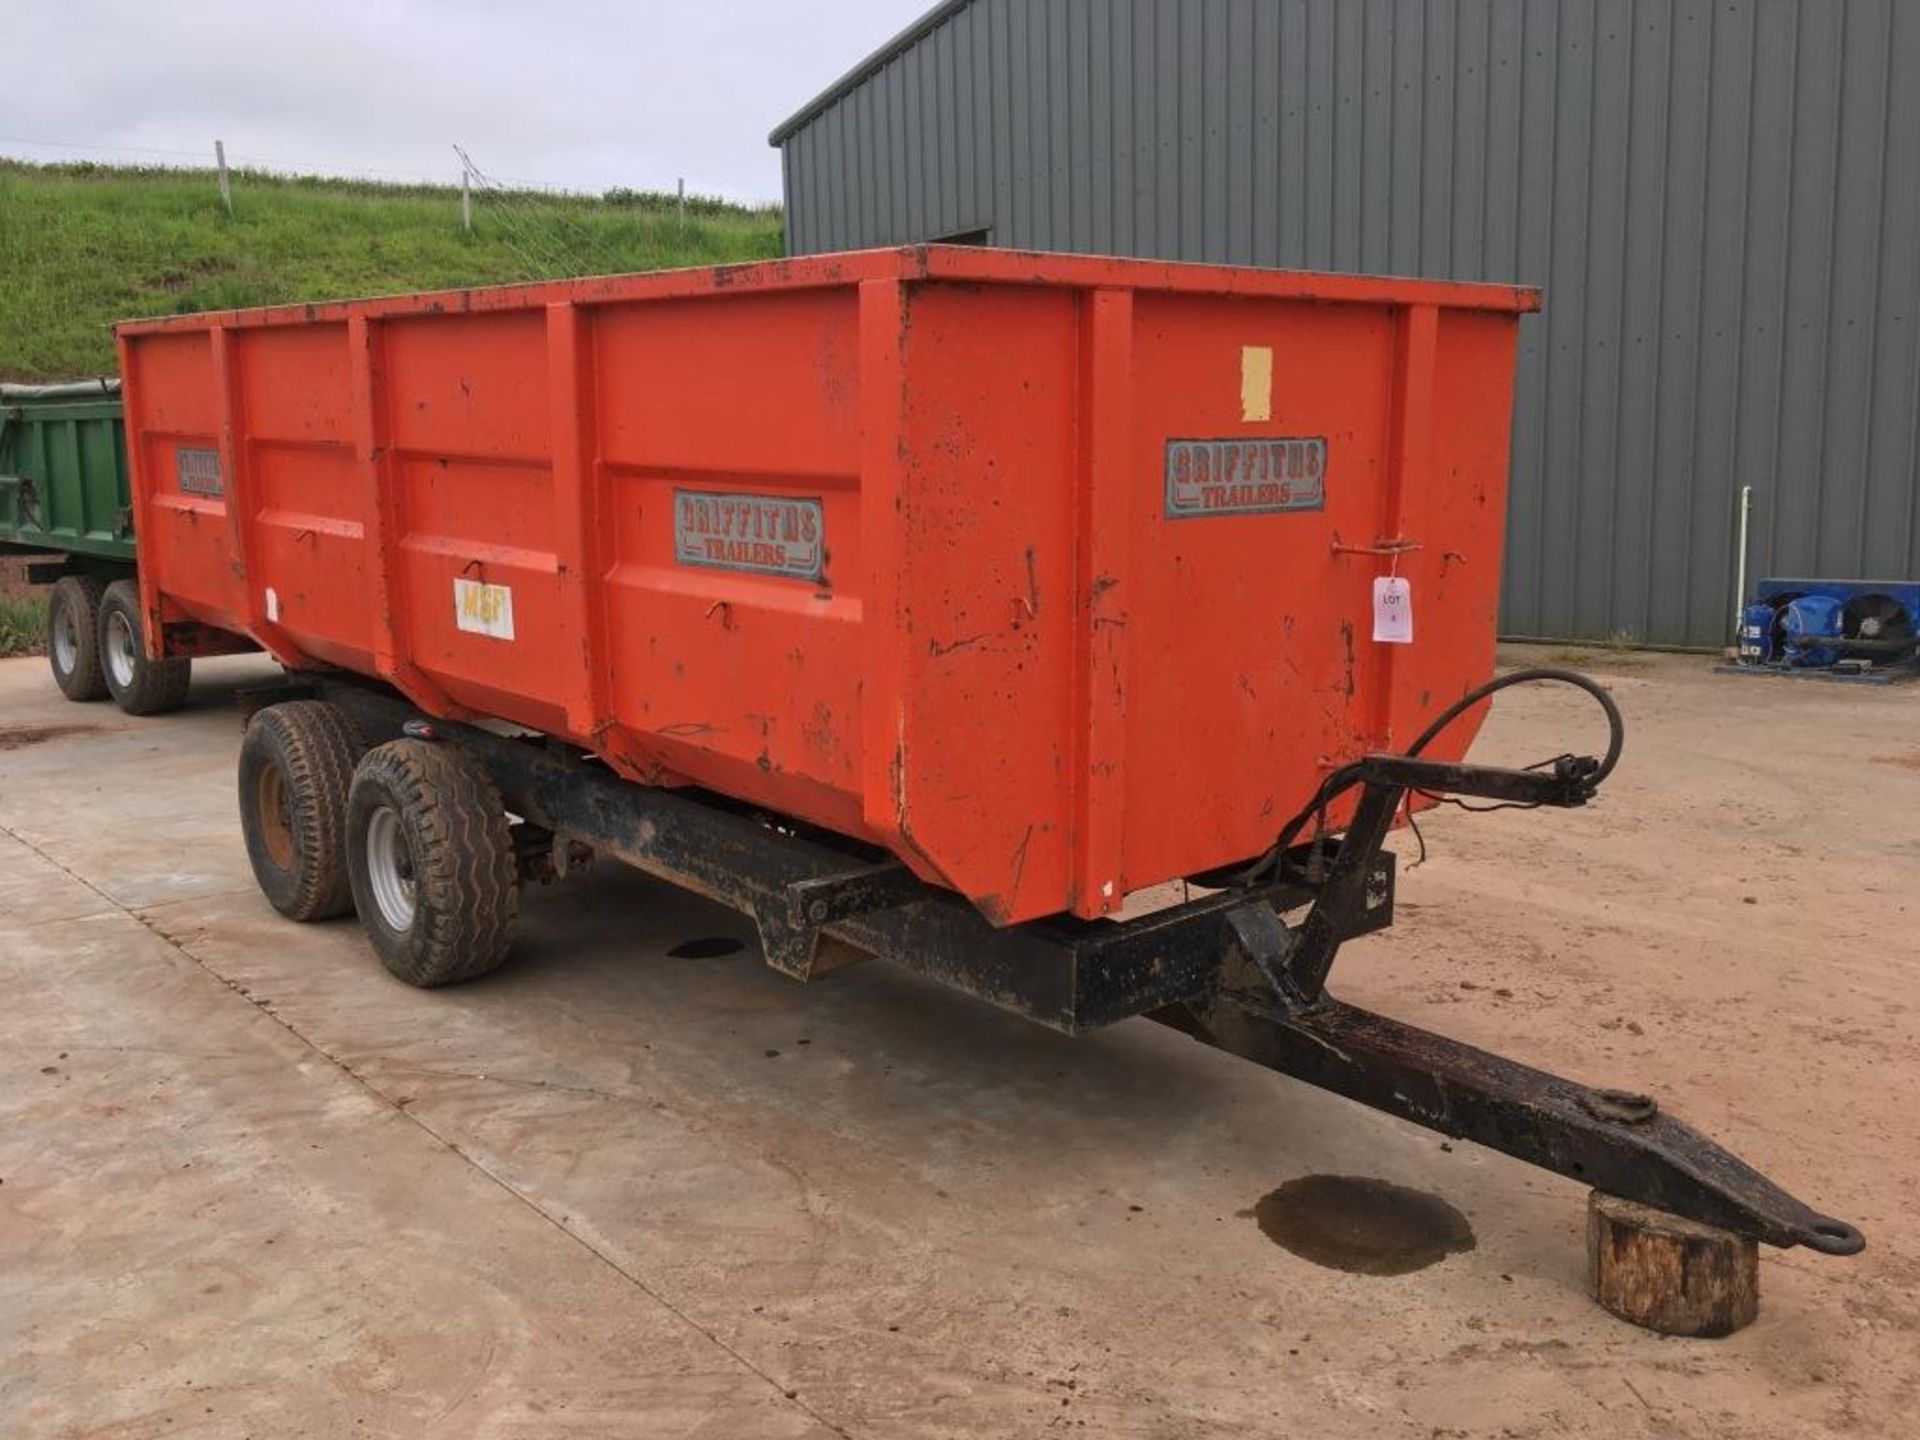 Griffiths 10 ton twin axle tipping trailer, serial number: 6674 (1990) - Image 2 of 10